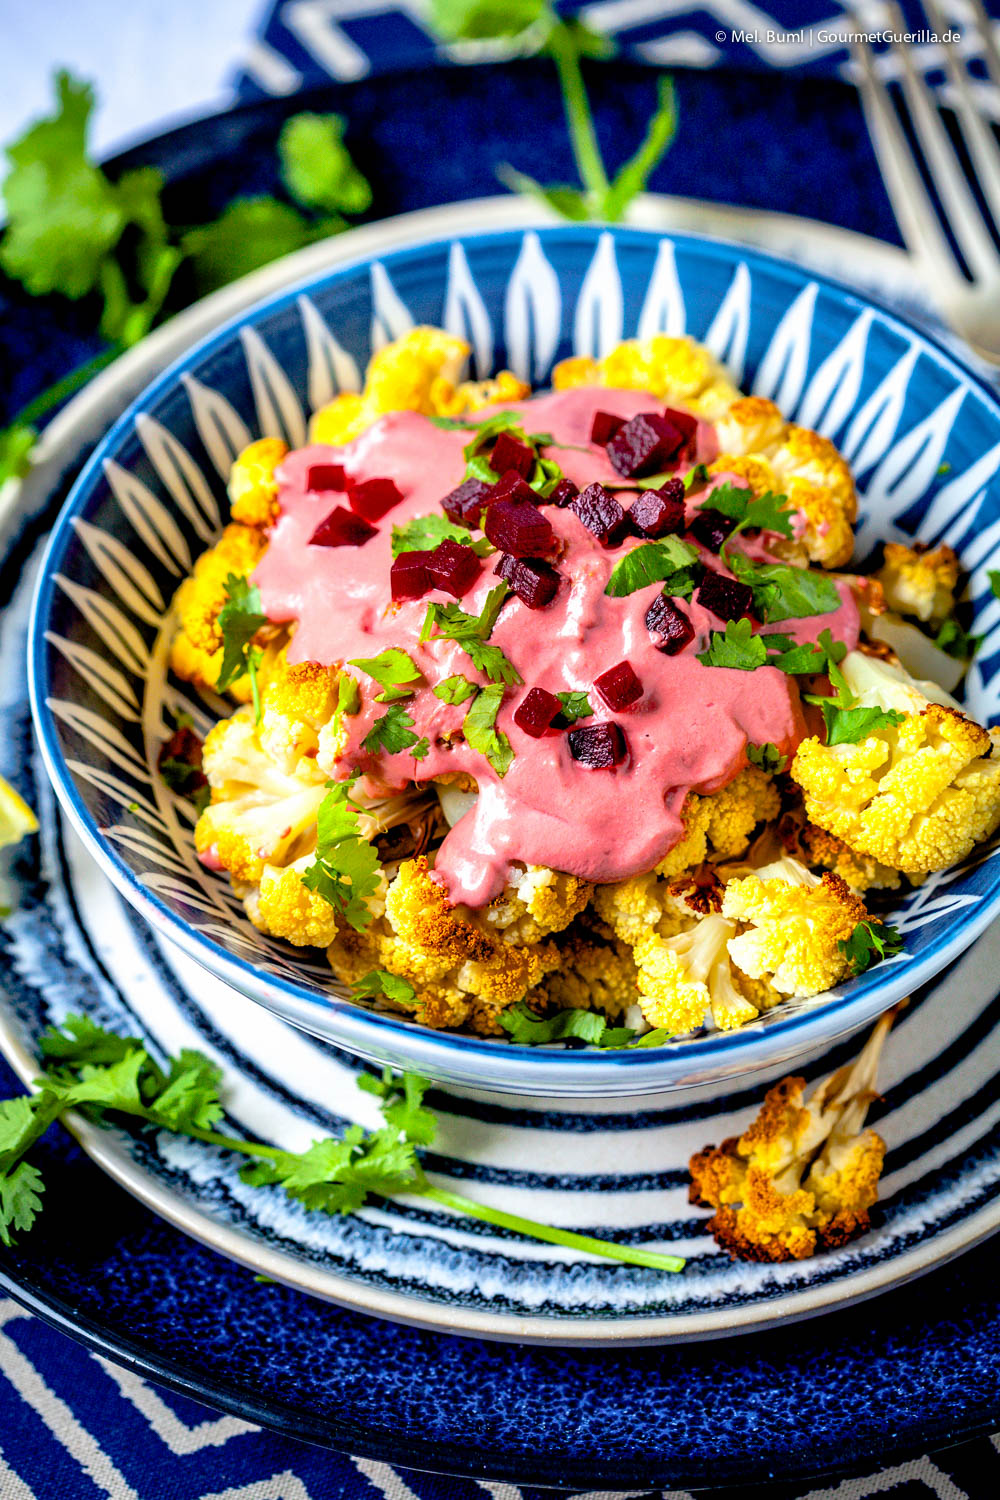 {Israel vegan} Oven-baked cauliflower with Pretty Pink Tahina sauce. Because life needs more pink on the plate!